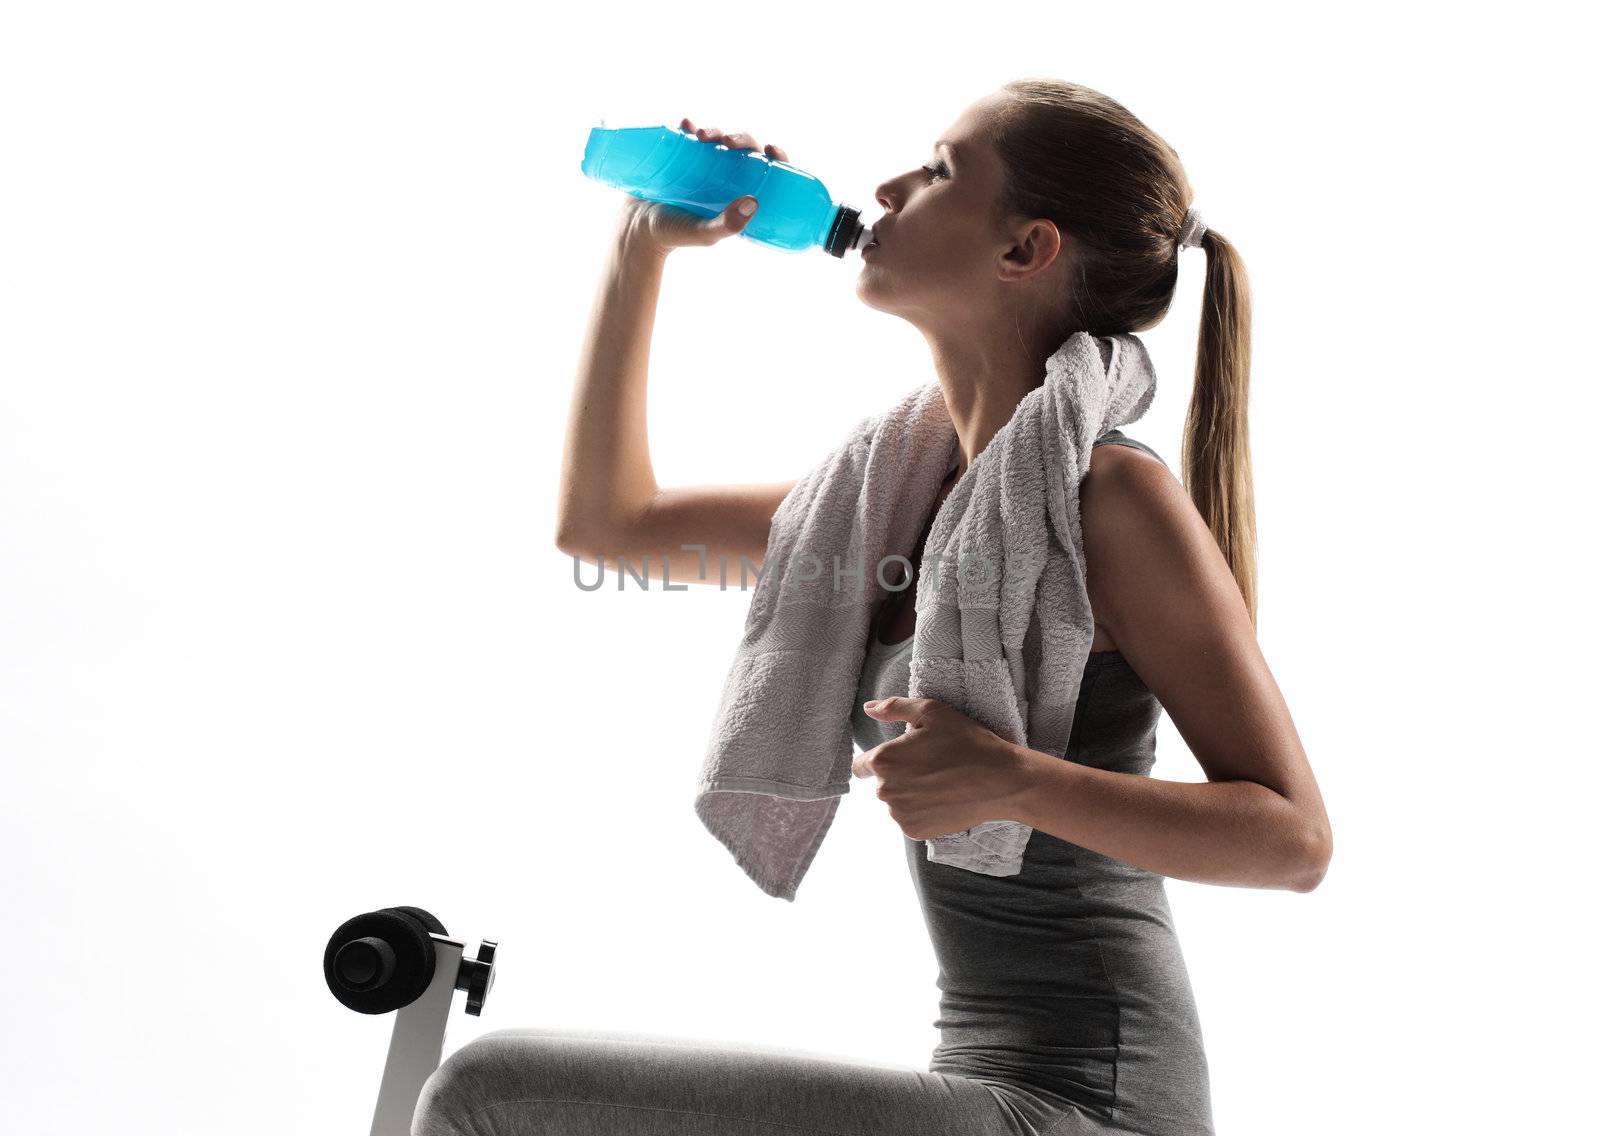 Thirsty young woman drinking after fitness workout. white background

